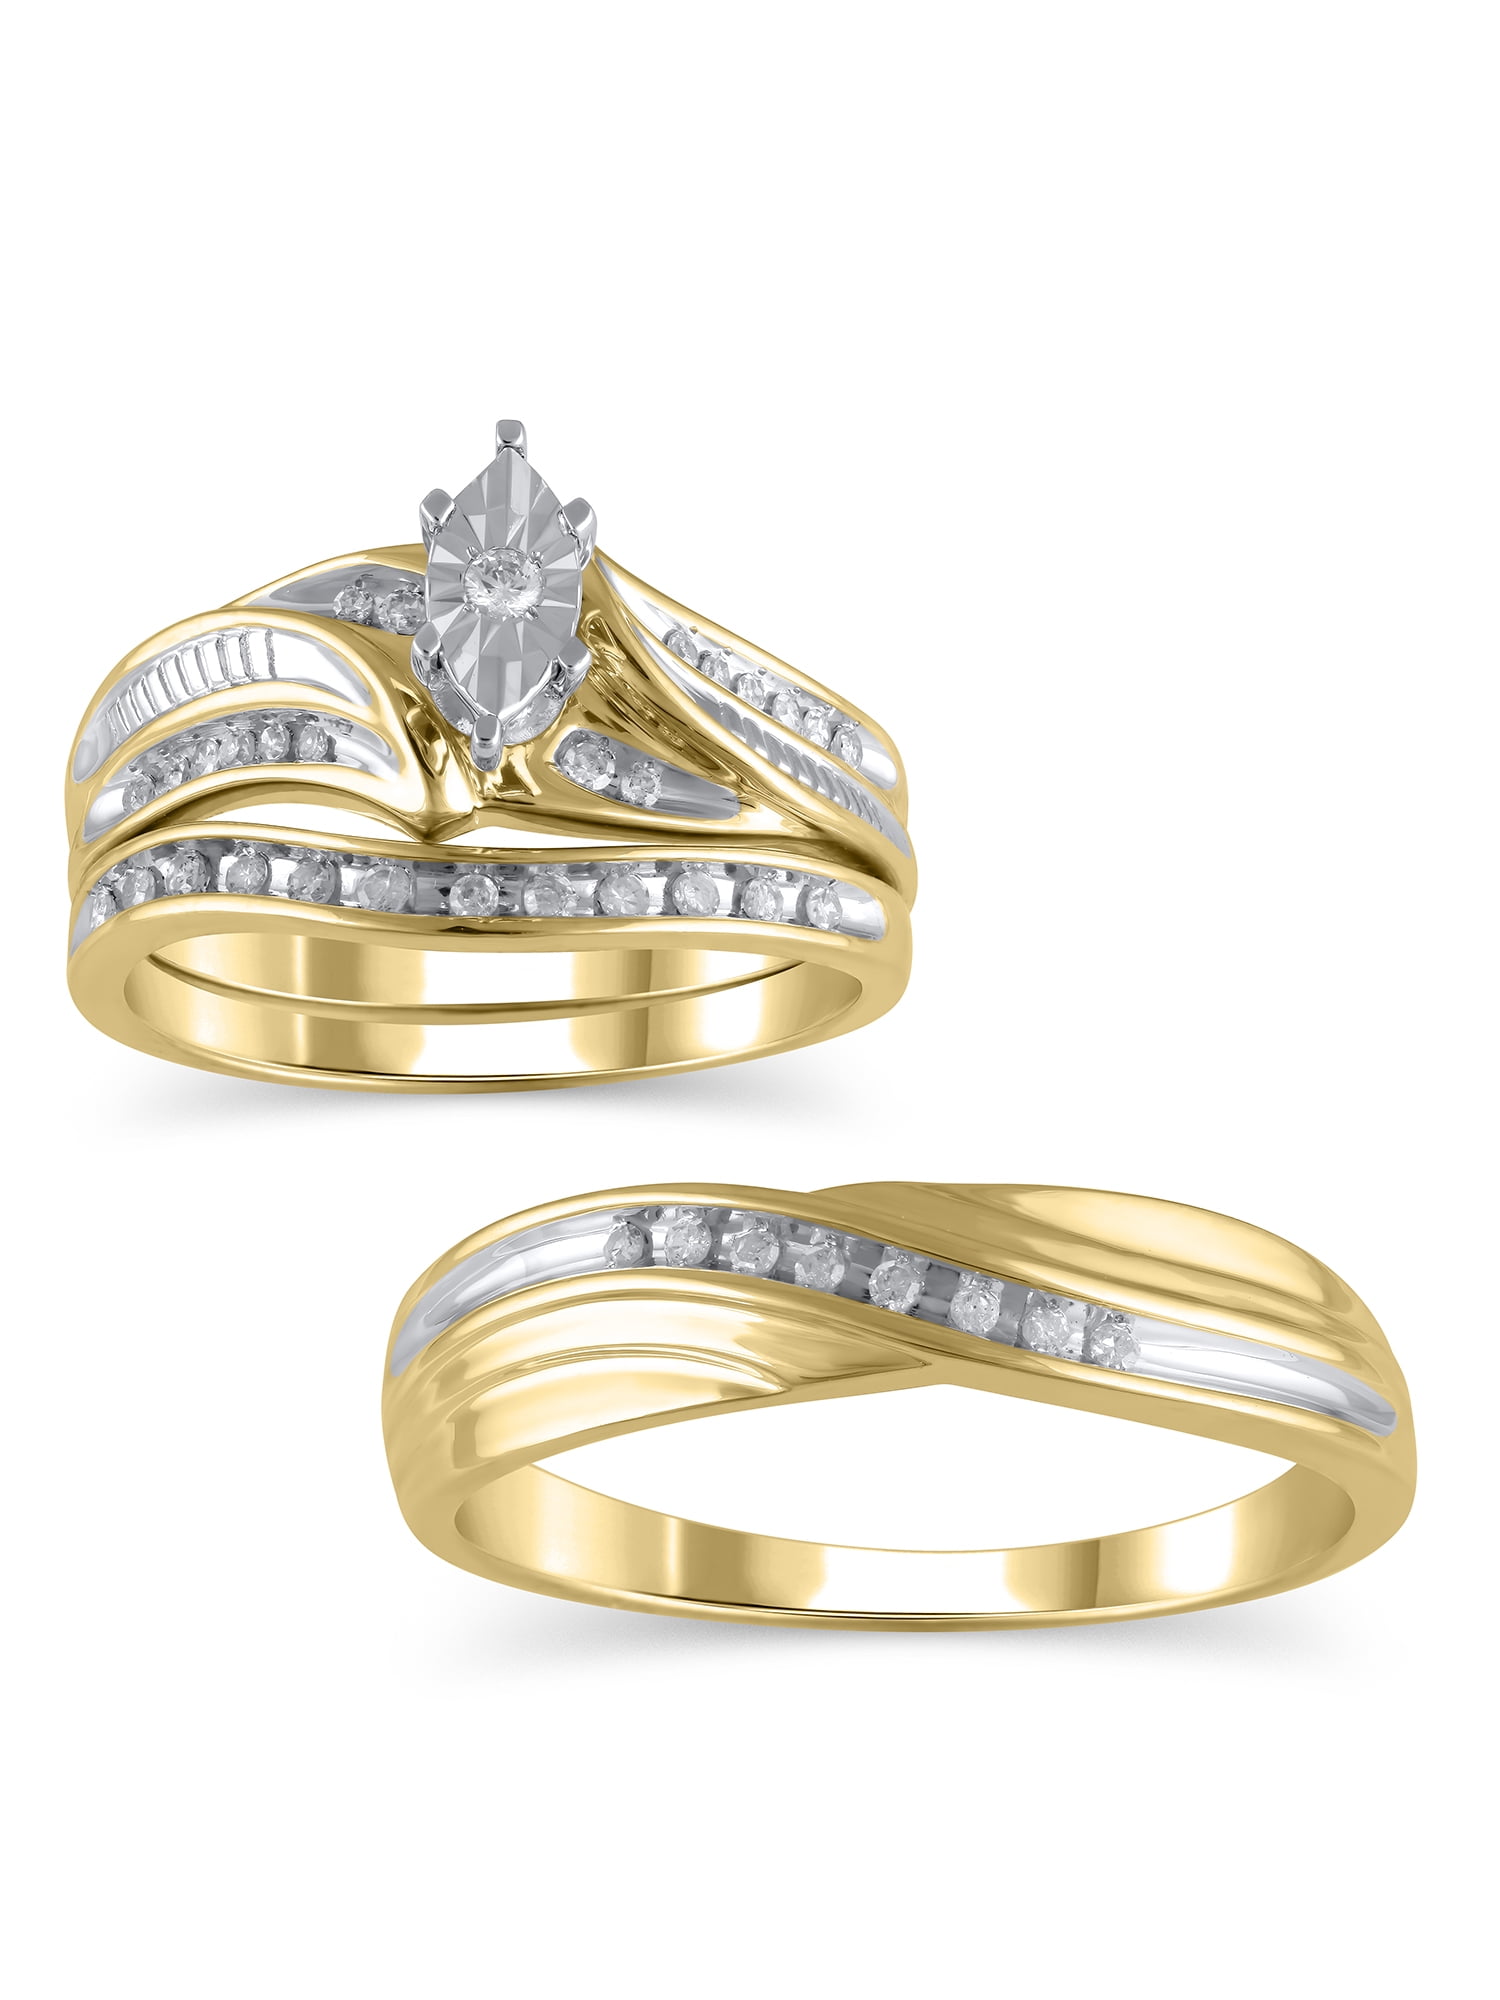 Diamond Wedding Yellow Gold Over Trio His & Her Bridal Band Engagement Ring Set 